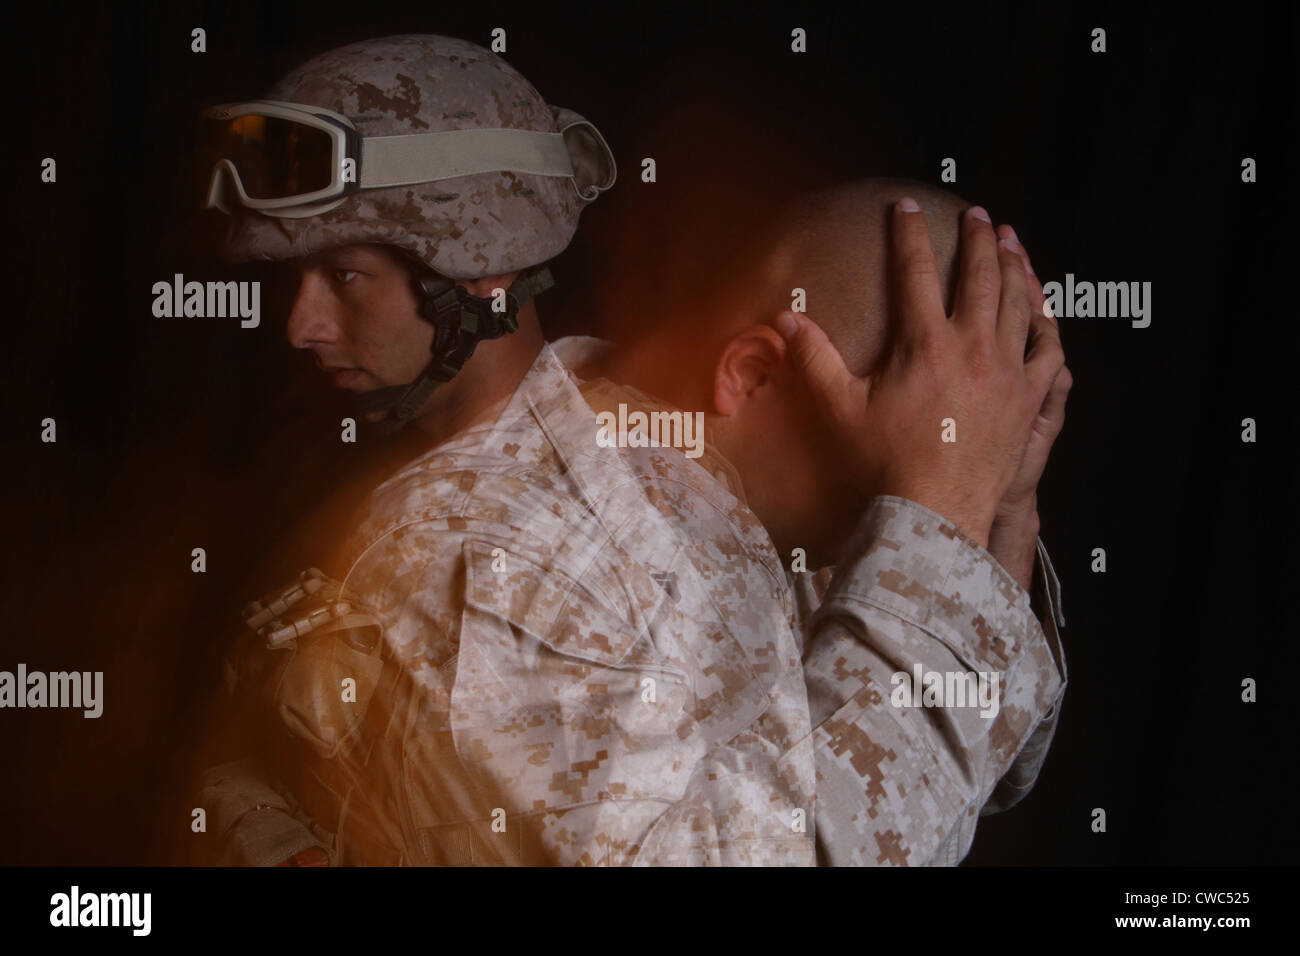 Shell Shocked Africanamerican Soldier Suffering Ptsd Stock Photo